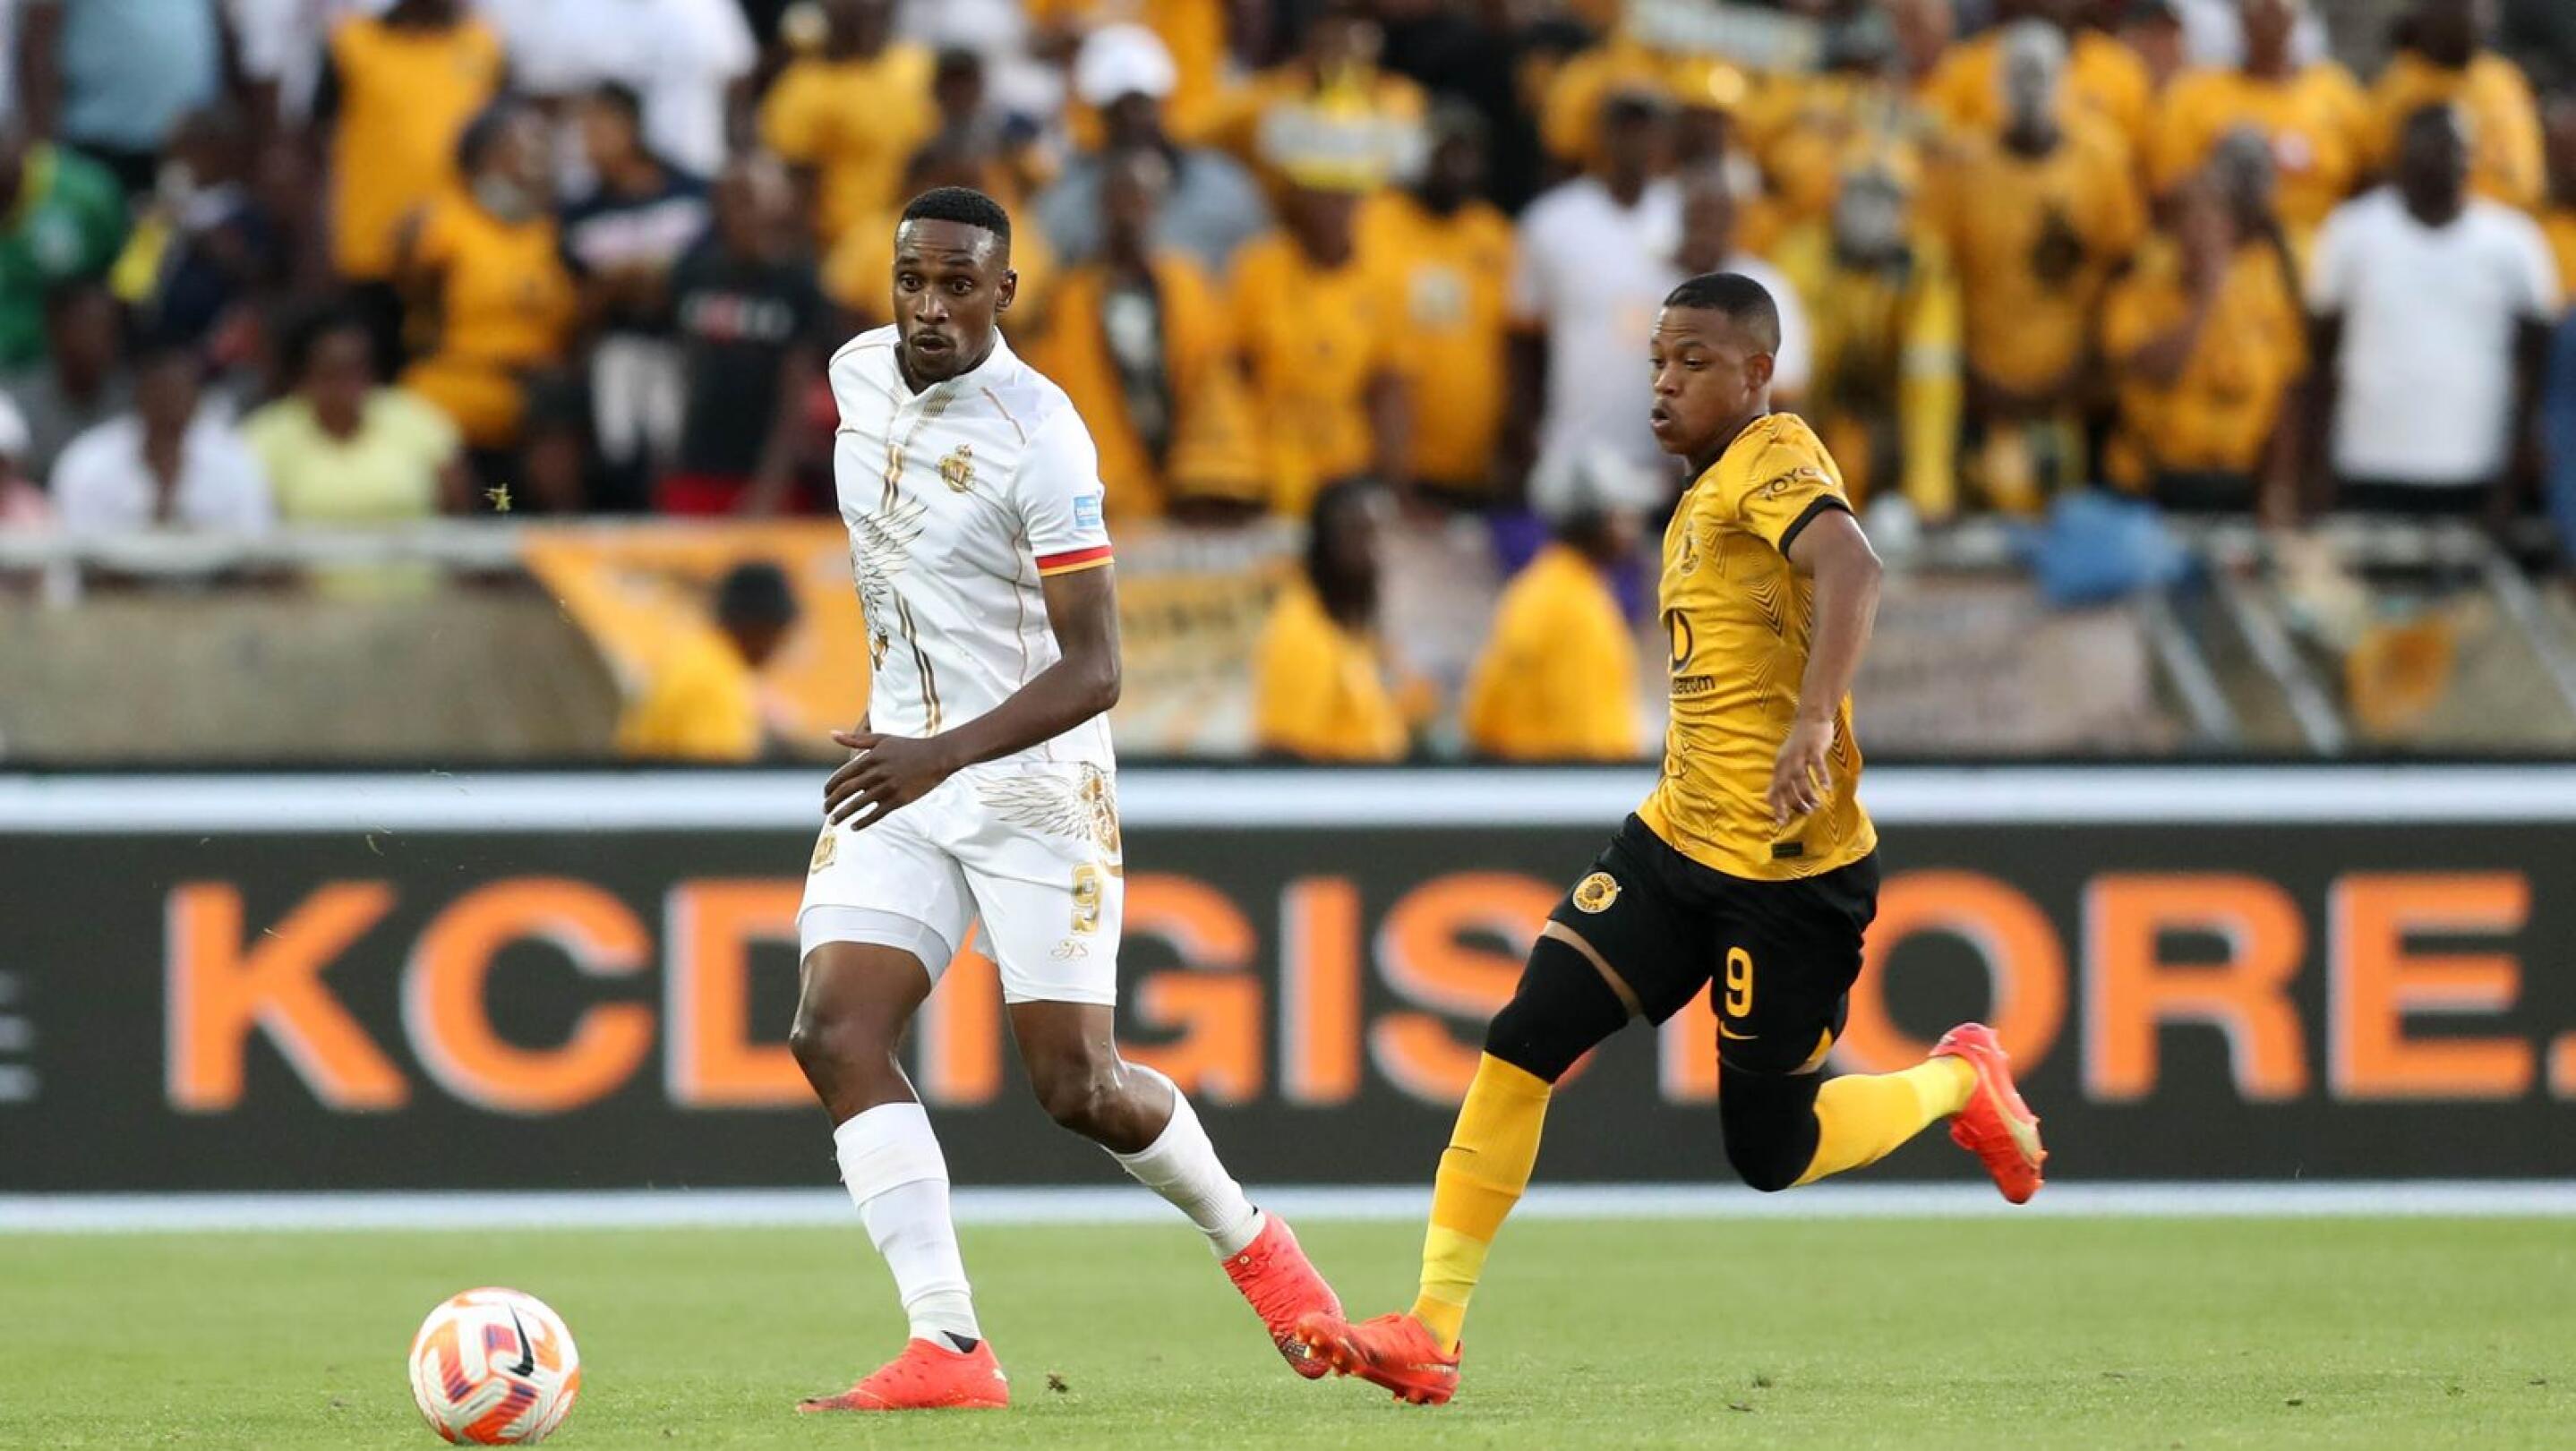 Mxolisi Macuphu of Royal AM is challenged by Ashley Du Preez of Kaizer Chiefs during their Dstv Premiership match at Peter Mokaba Stadium in Polokwane on Sunday